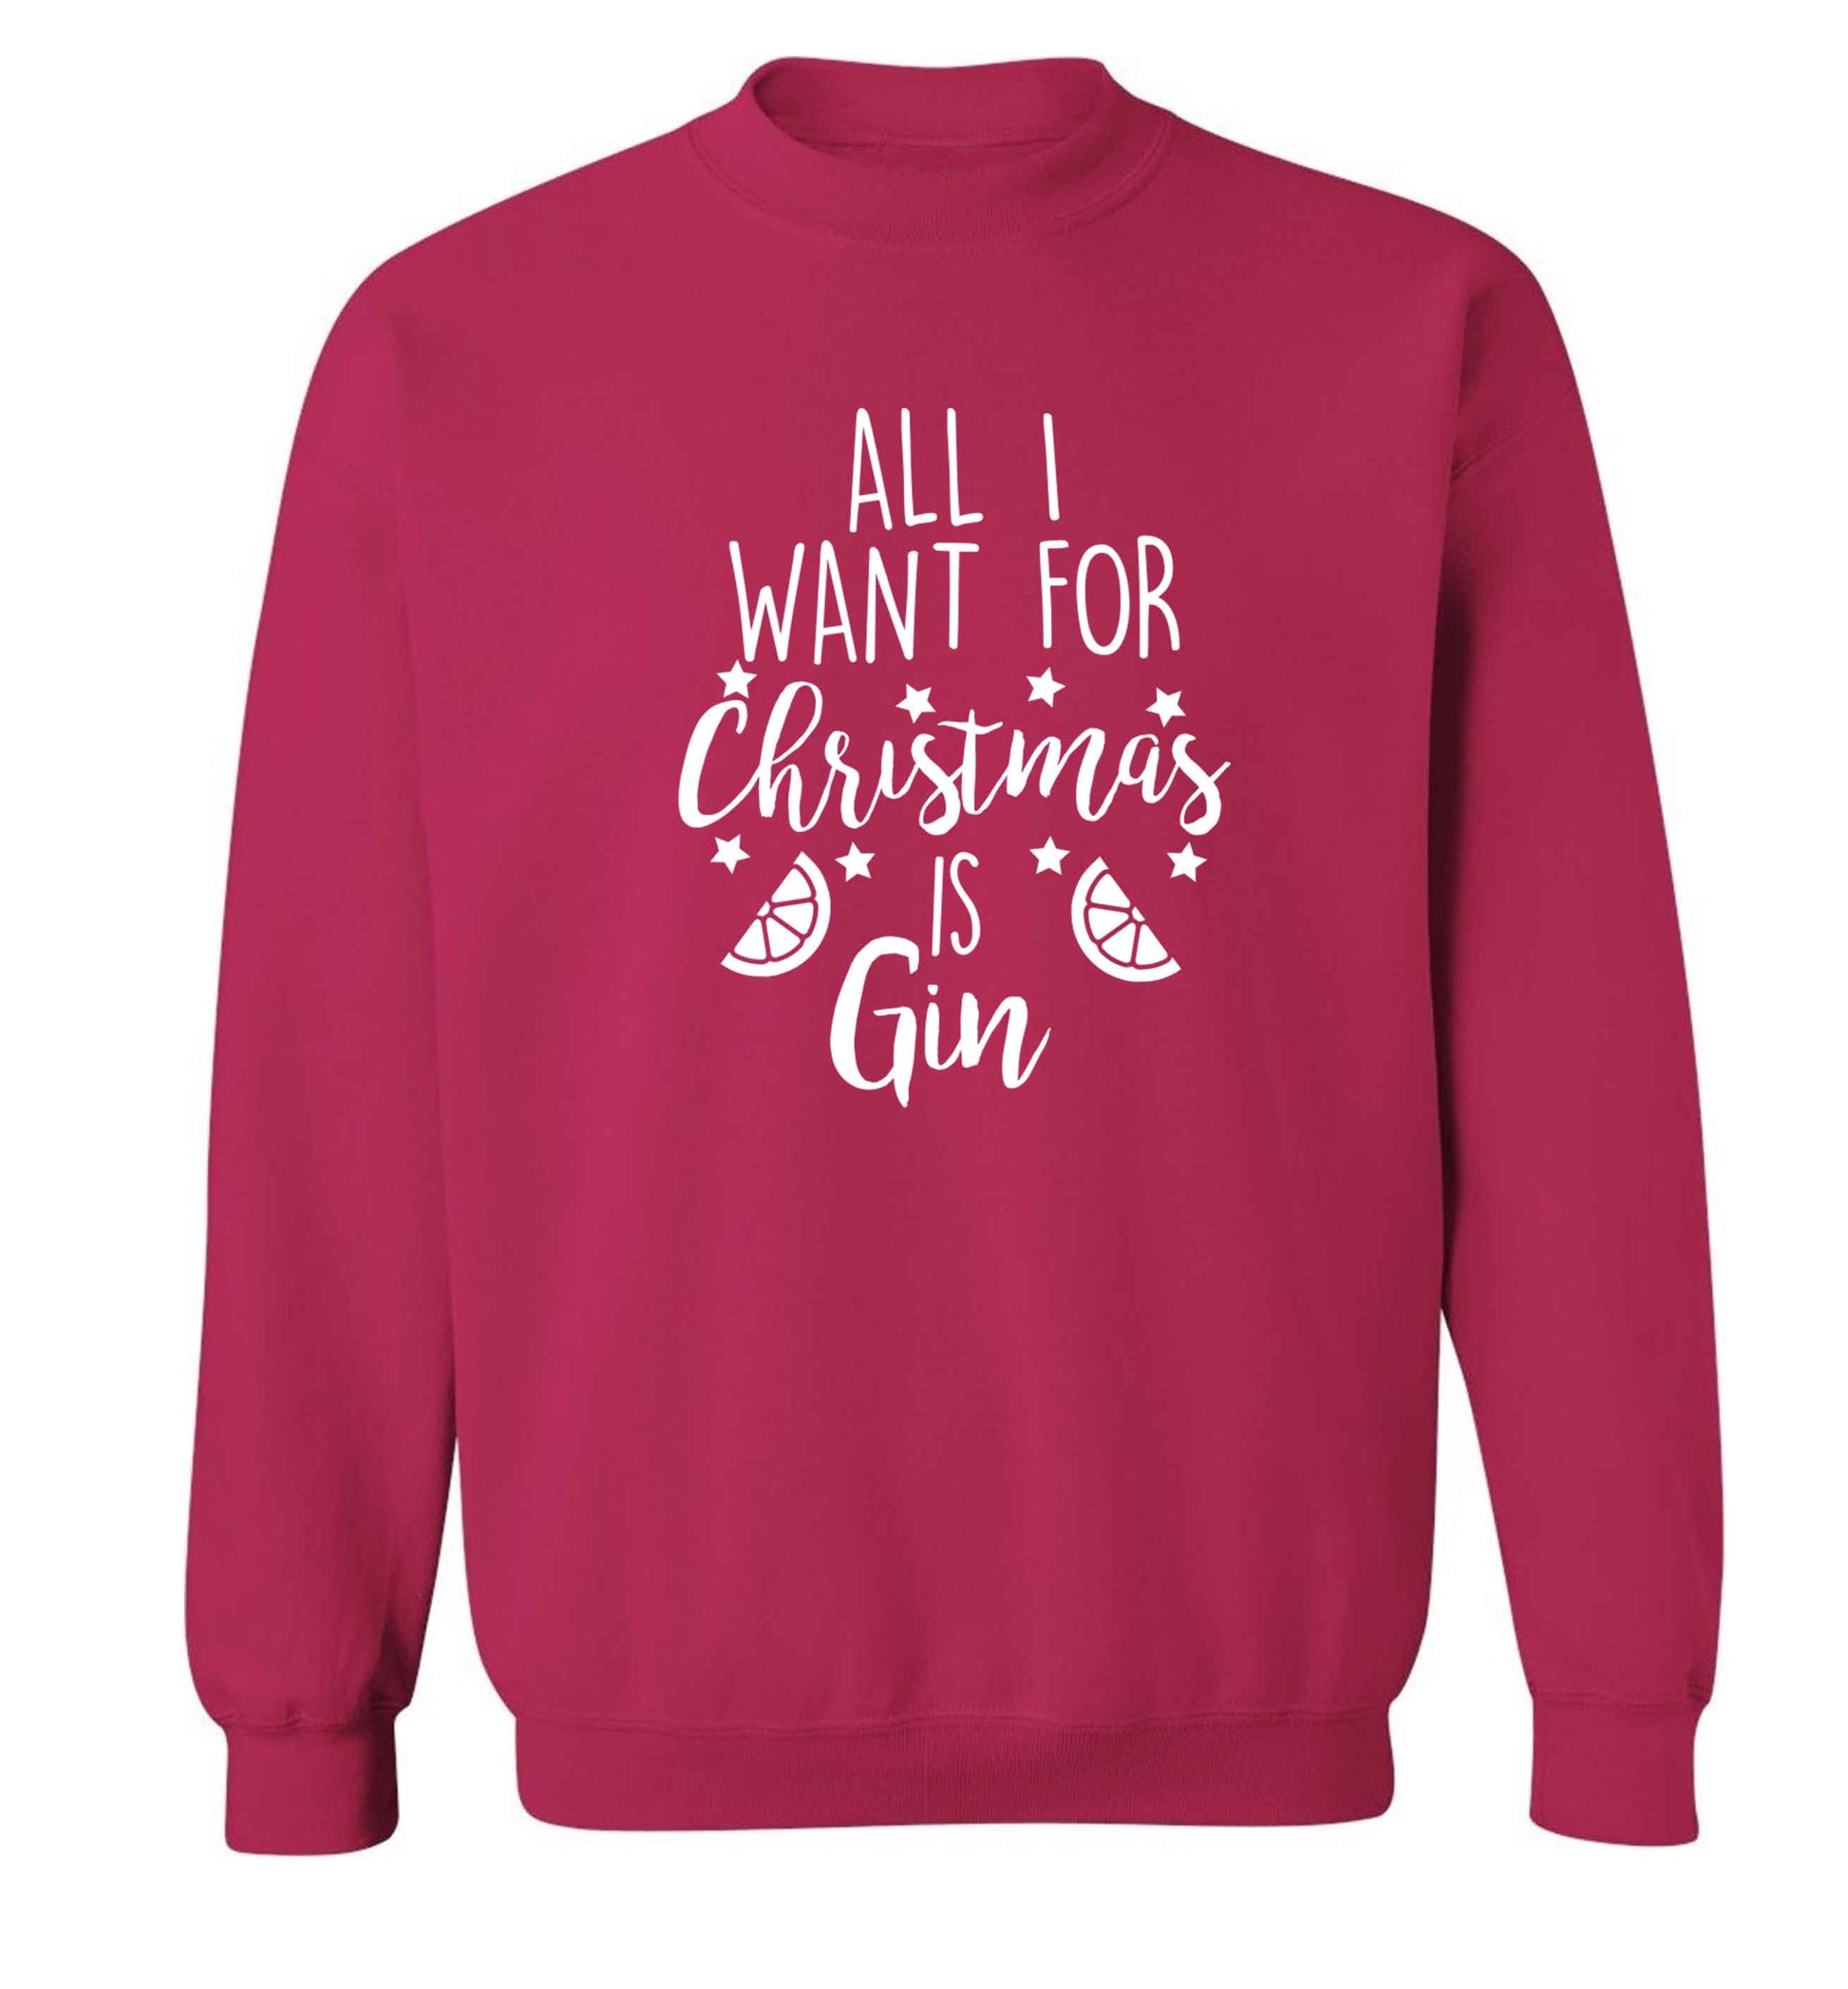 All I want for Christmas is gin Adult's unisex pink Sweater 2XL